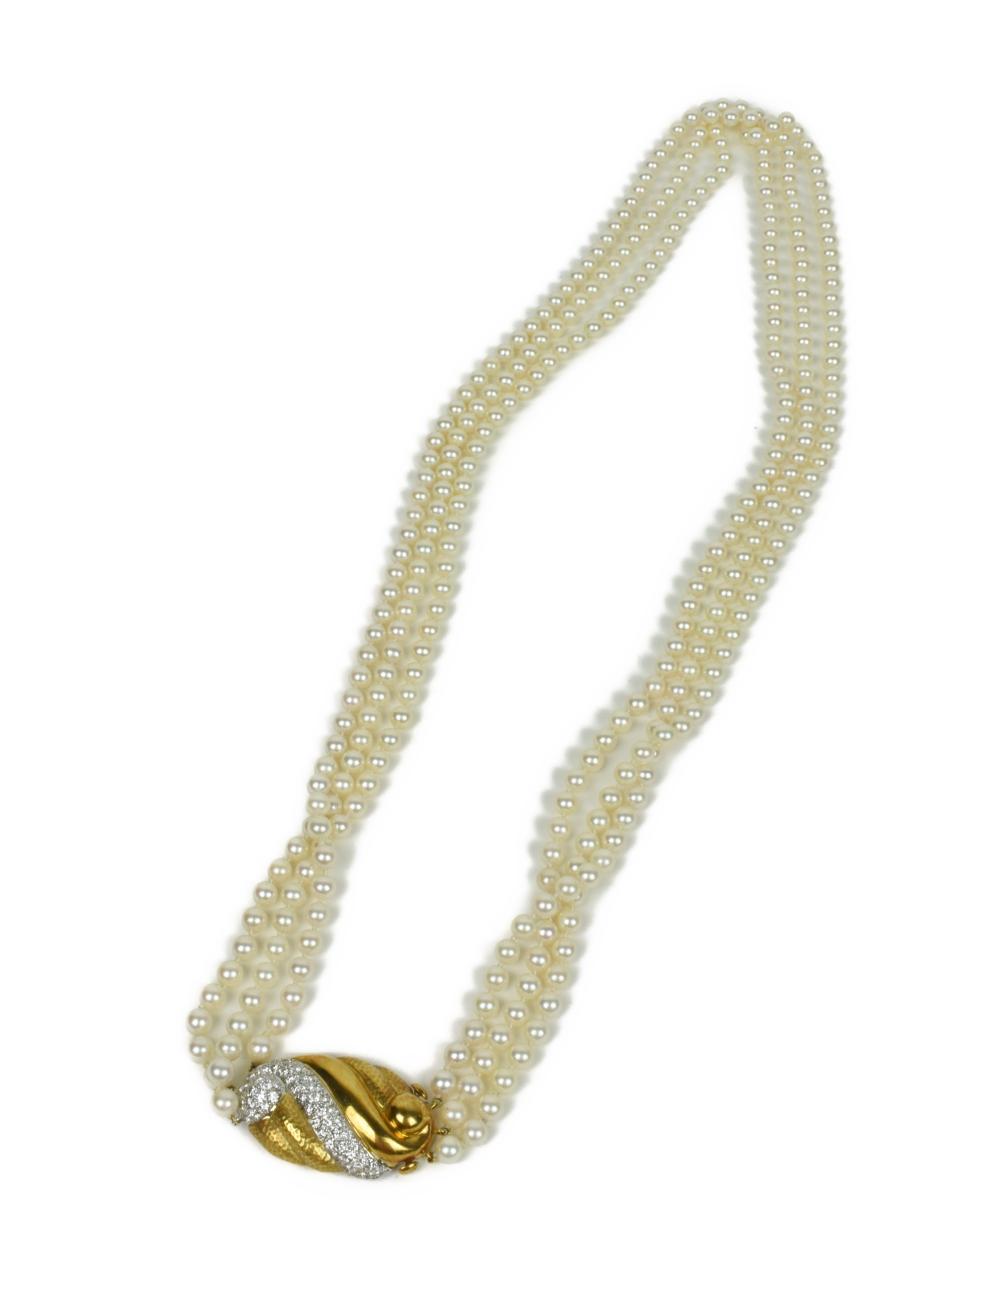 LADIES 18KT GOLD PEARLS AND DIAMONDS 3b395e